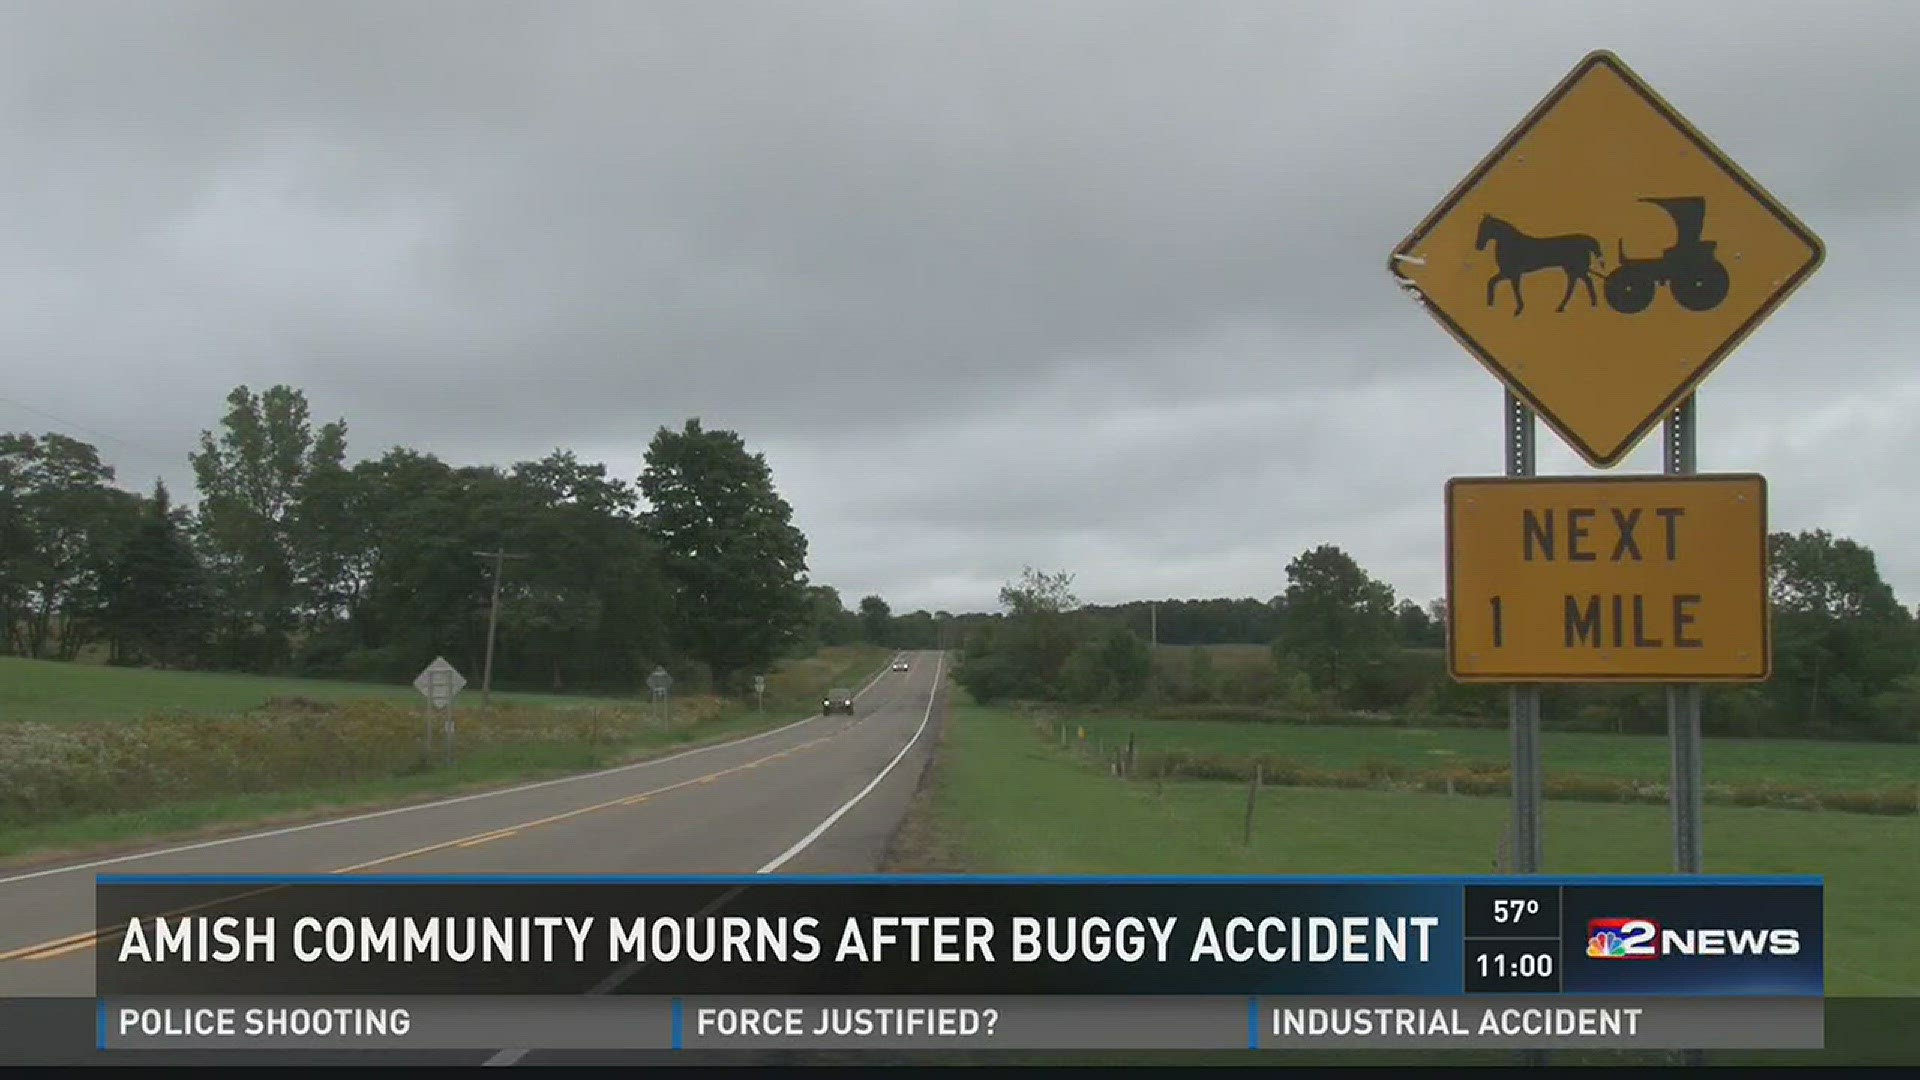 Amish Community Mourns After Buggy Accident